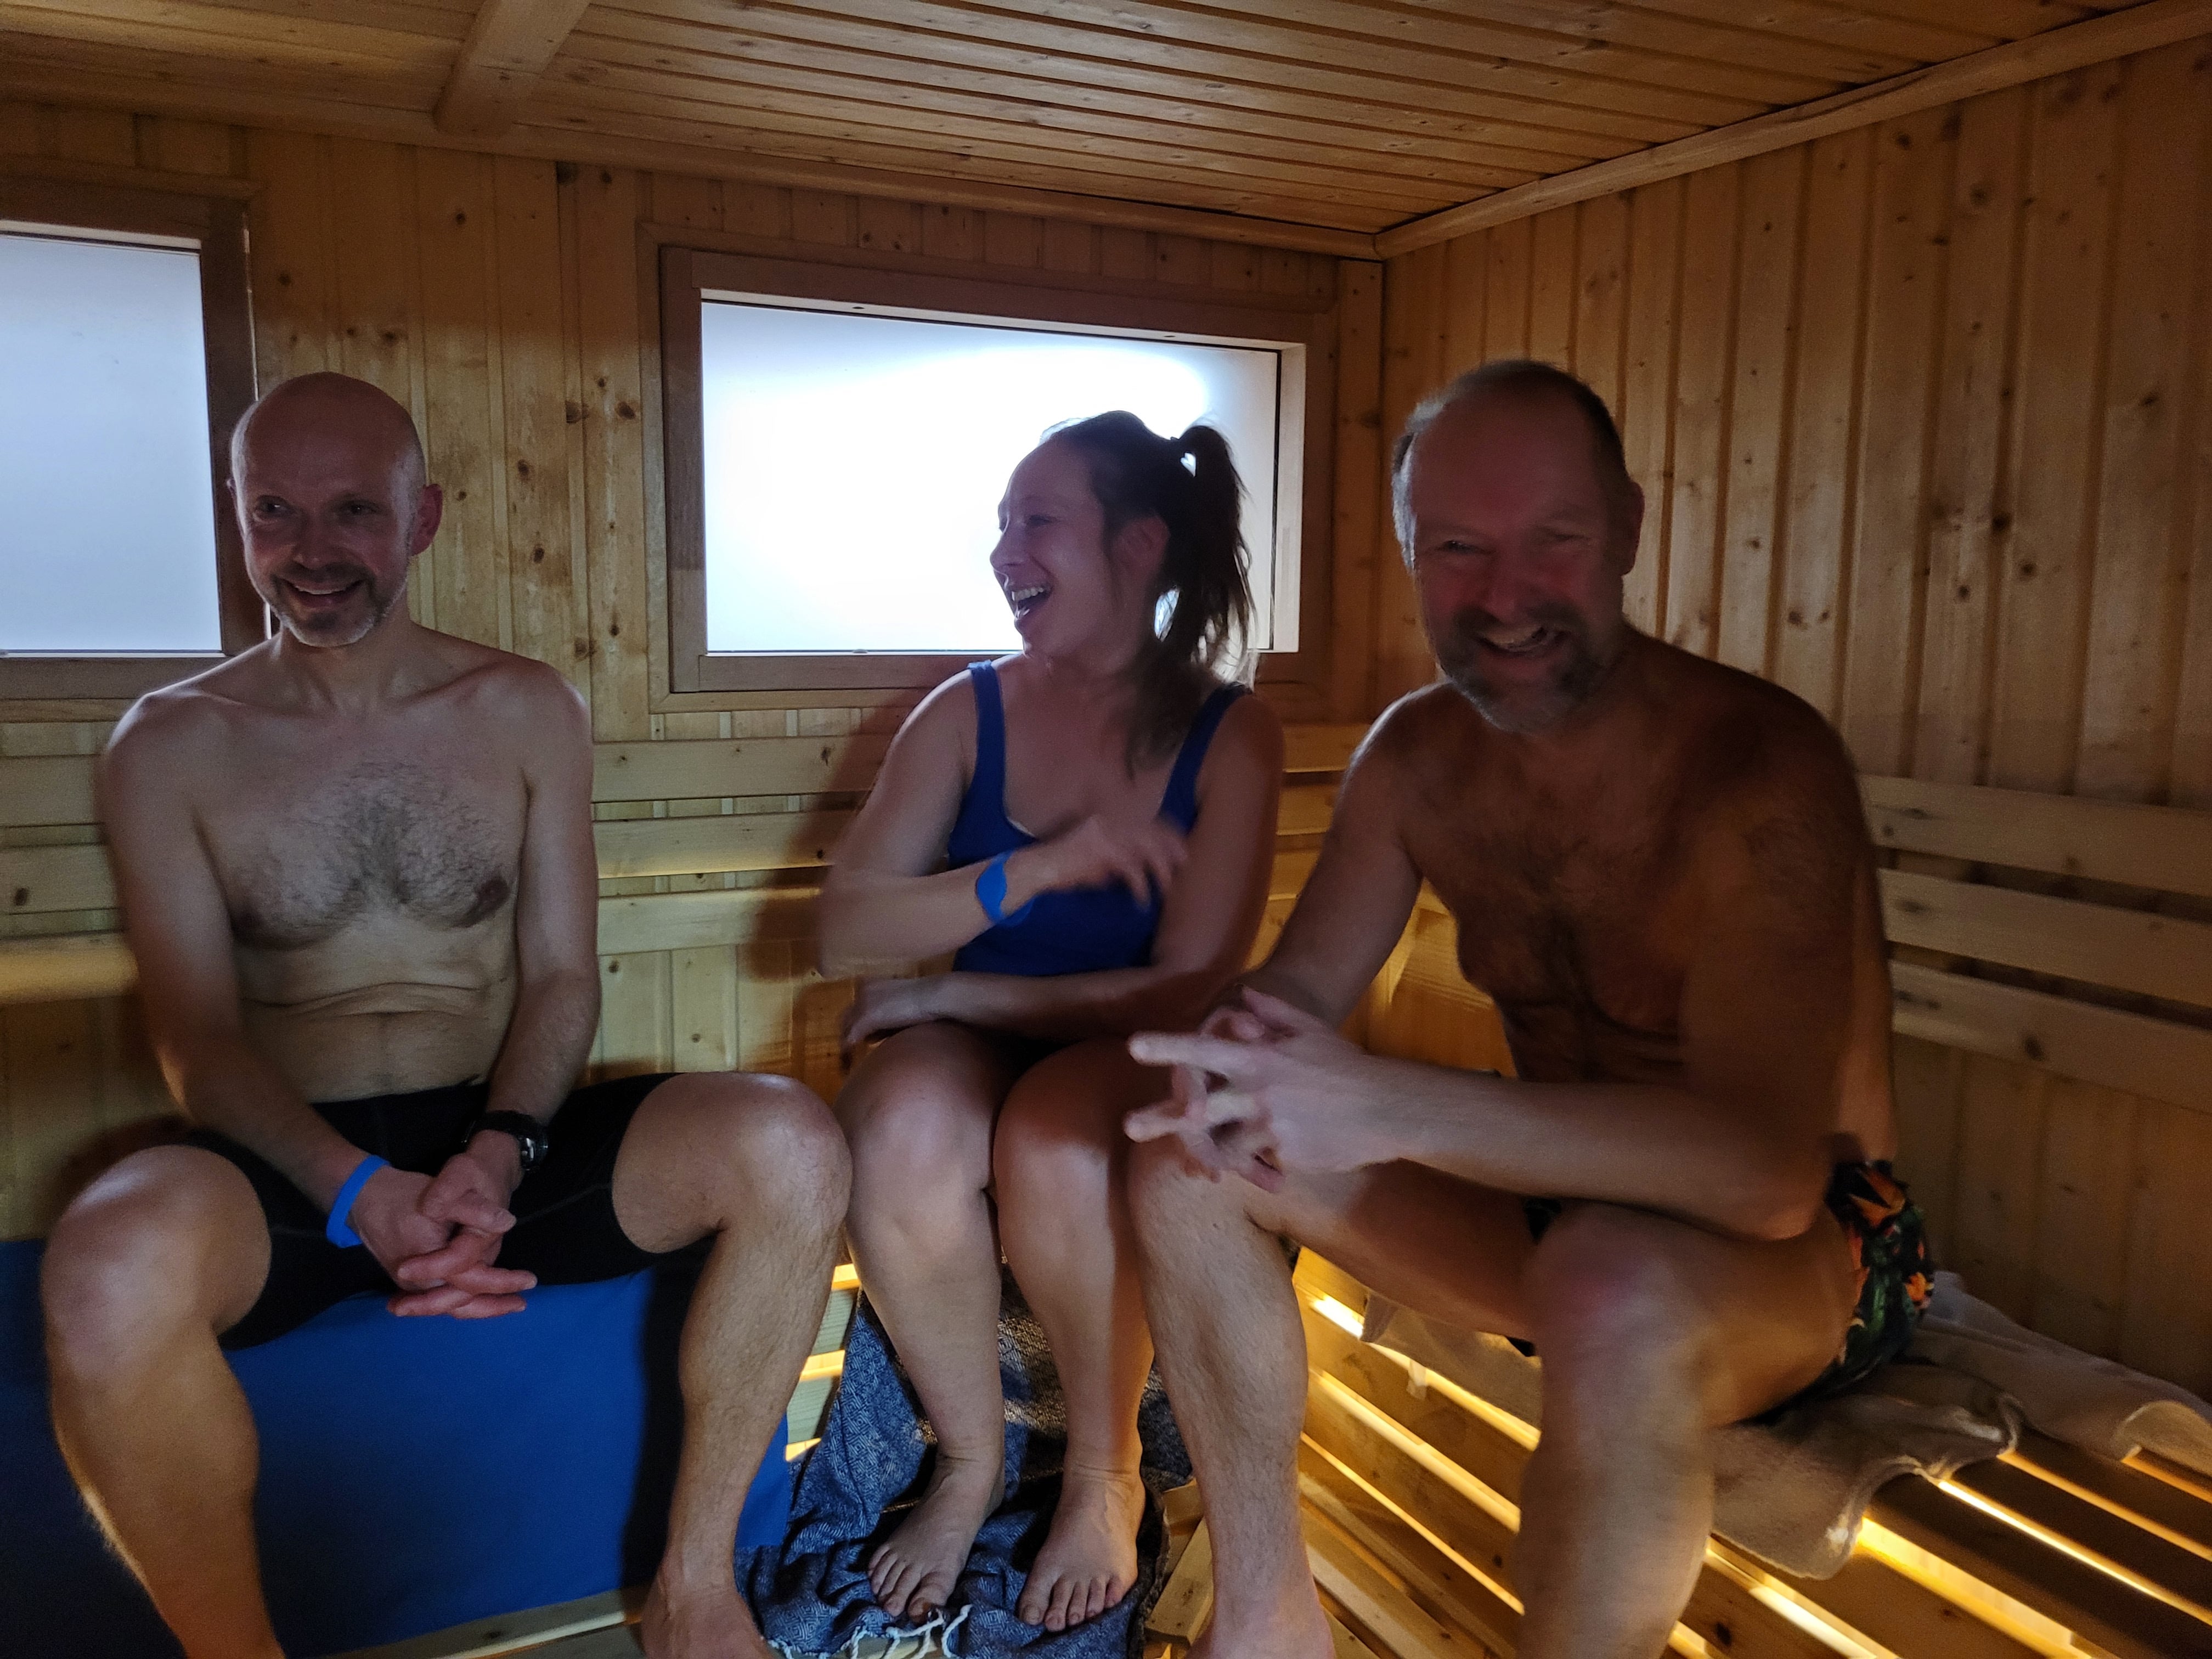 The sauna has created a space where local people can connect